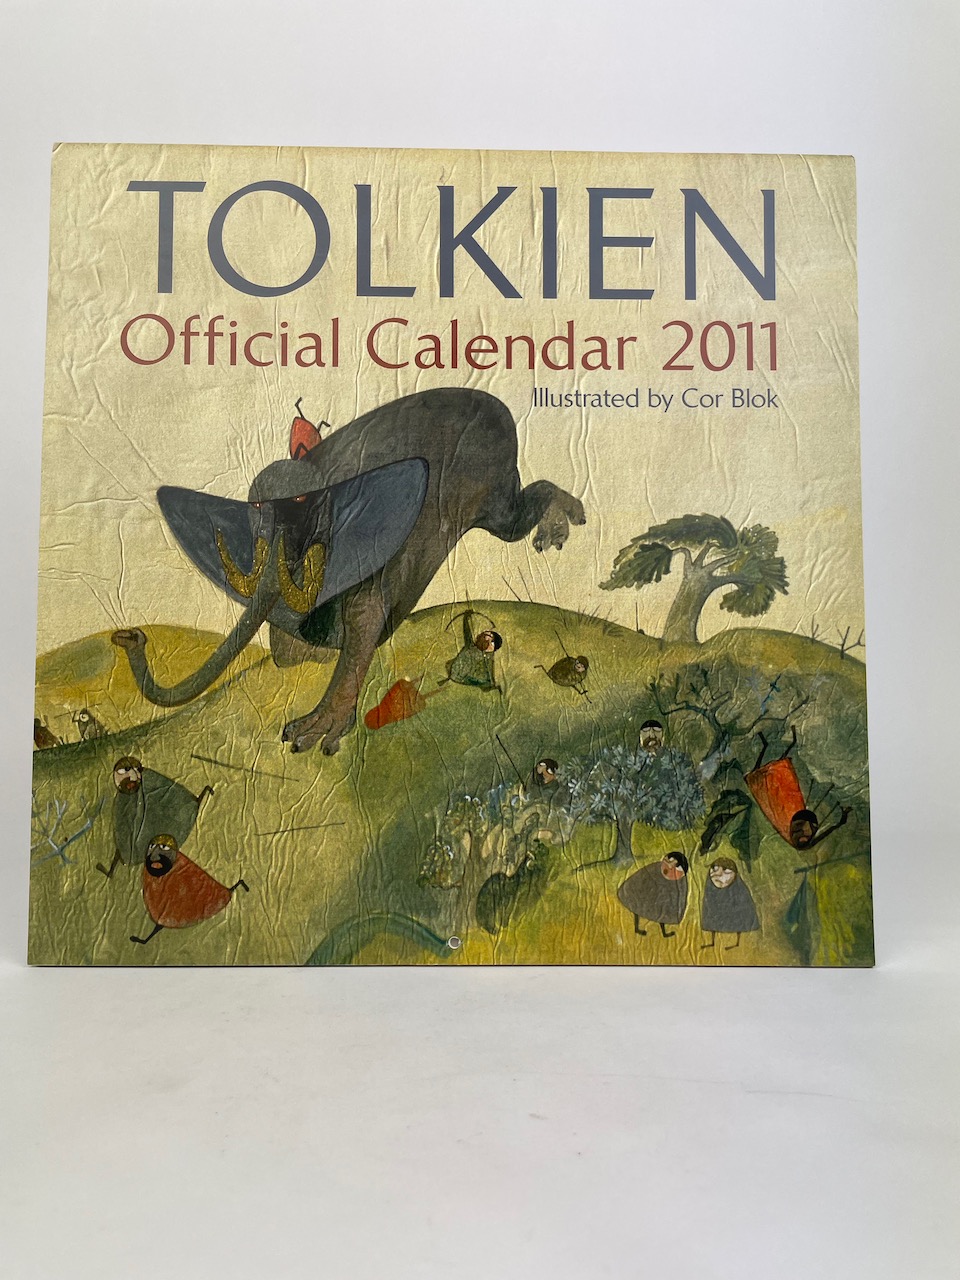 Tolkien Calendar 2011 features 13 paintings by the artist Cor Blok - signed 1